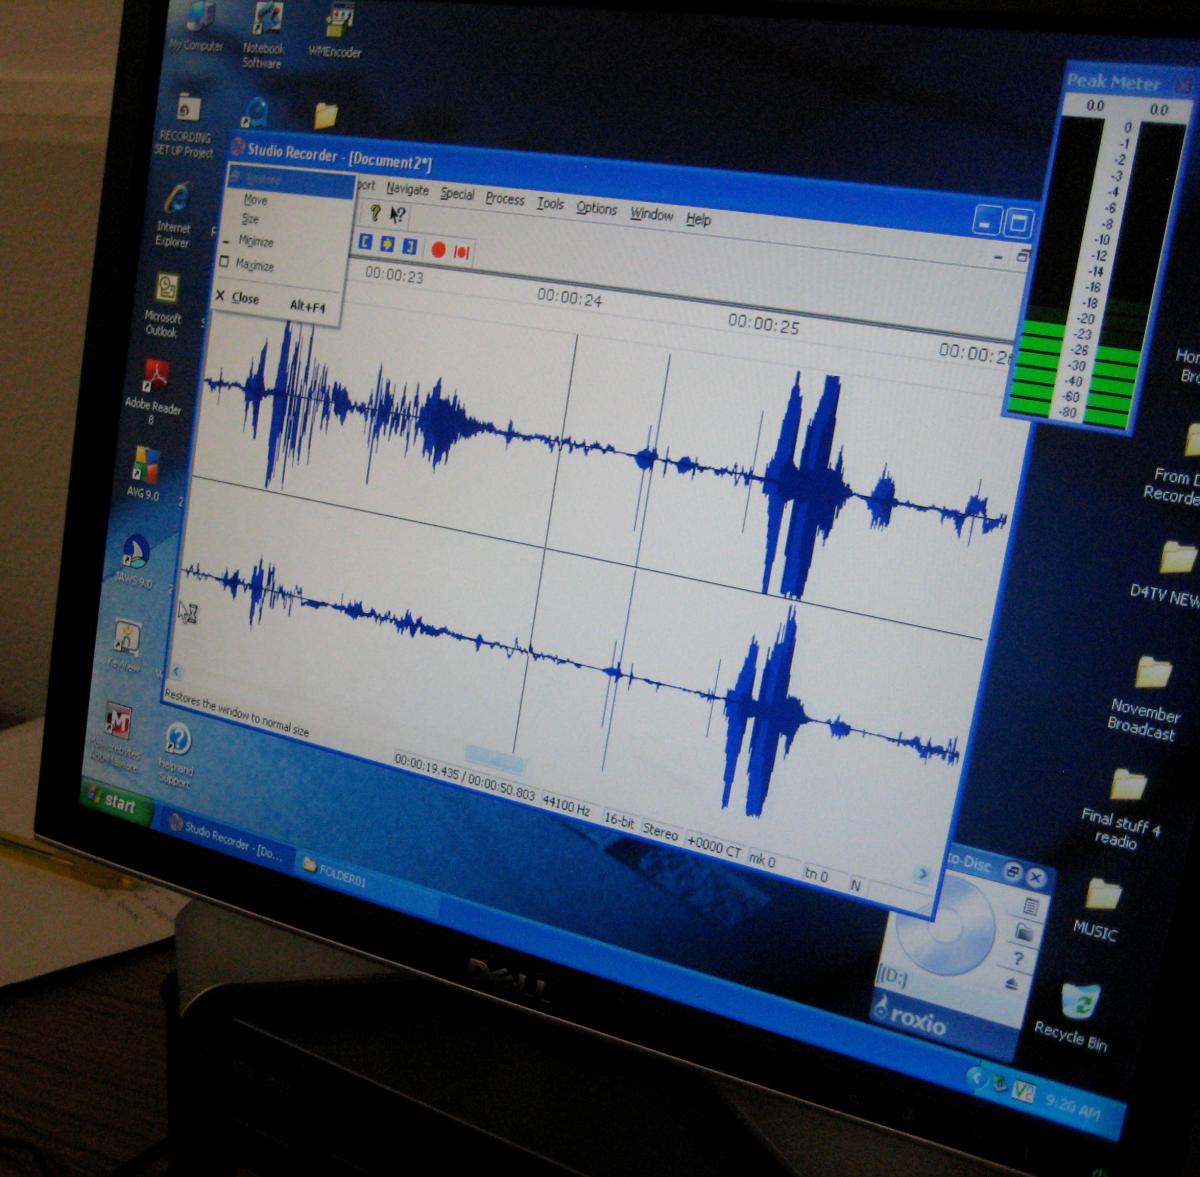 Image of Studio Recorder in use